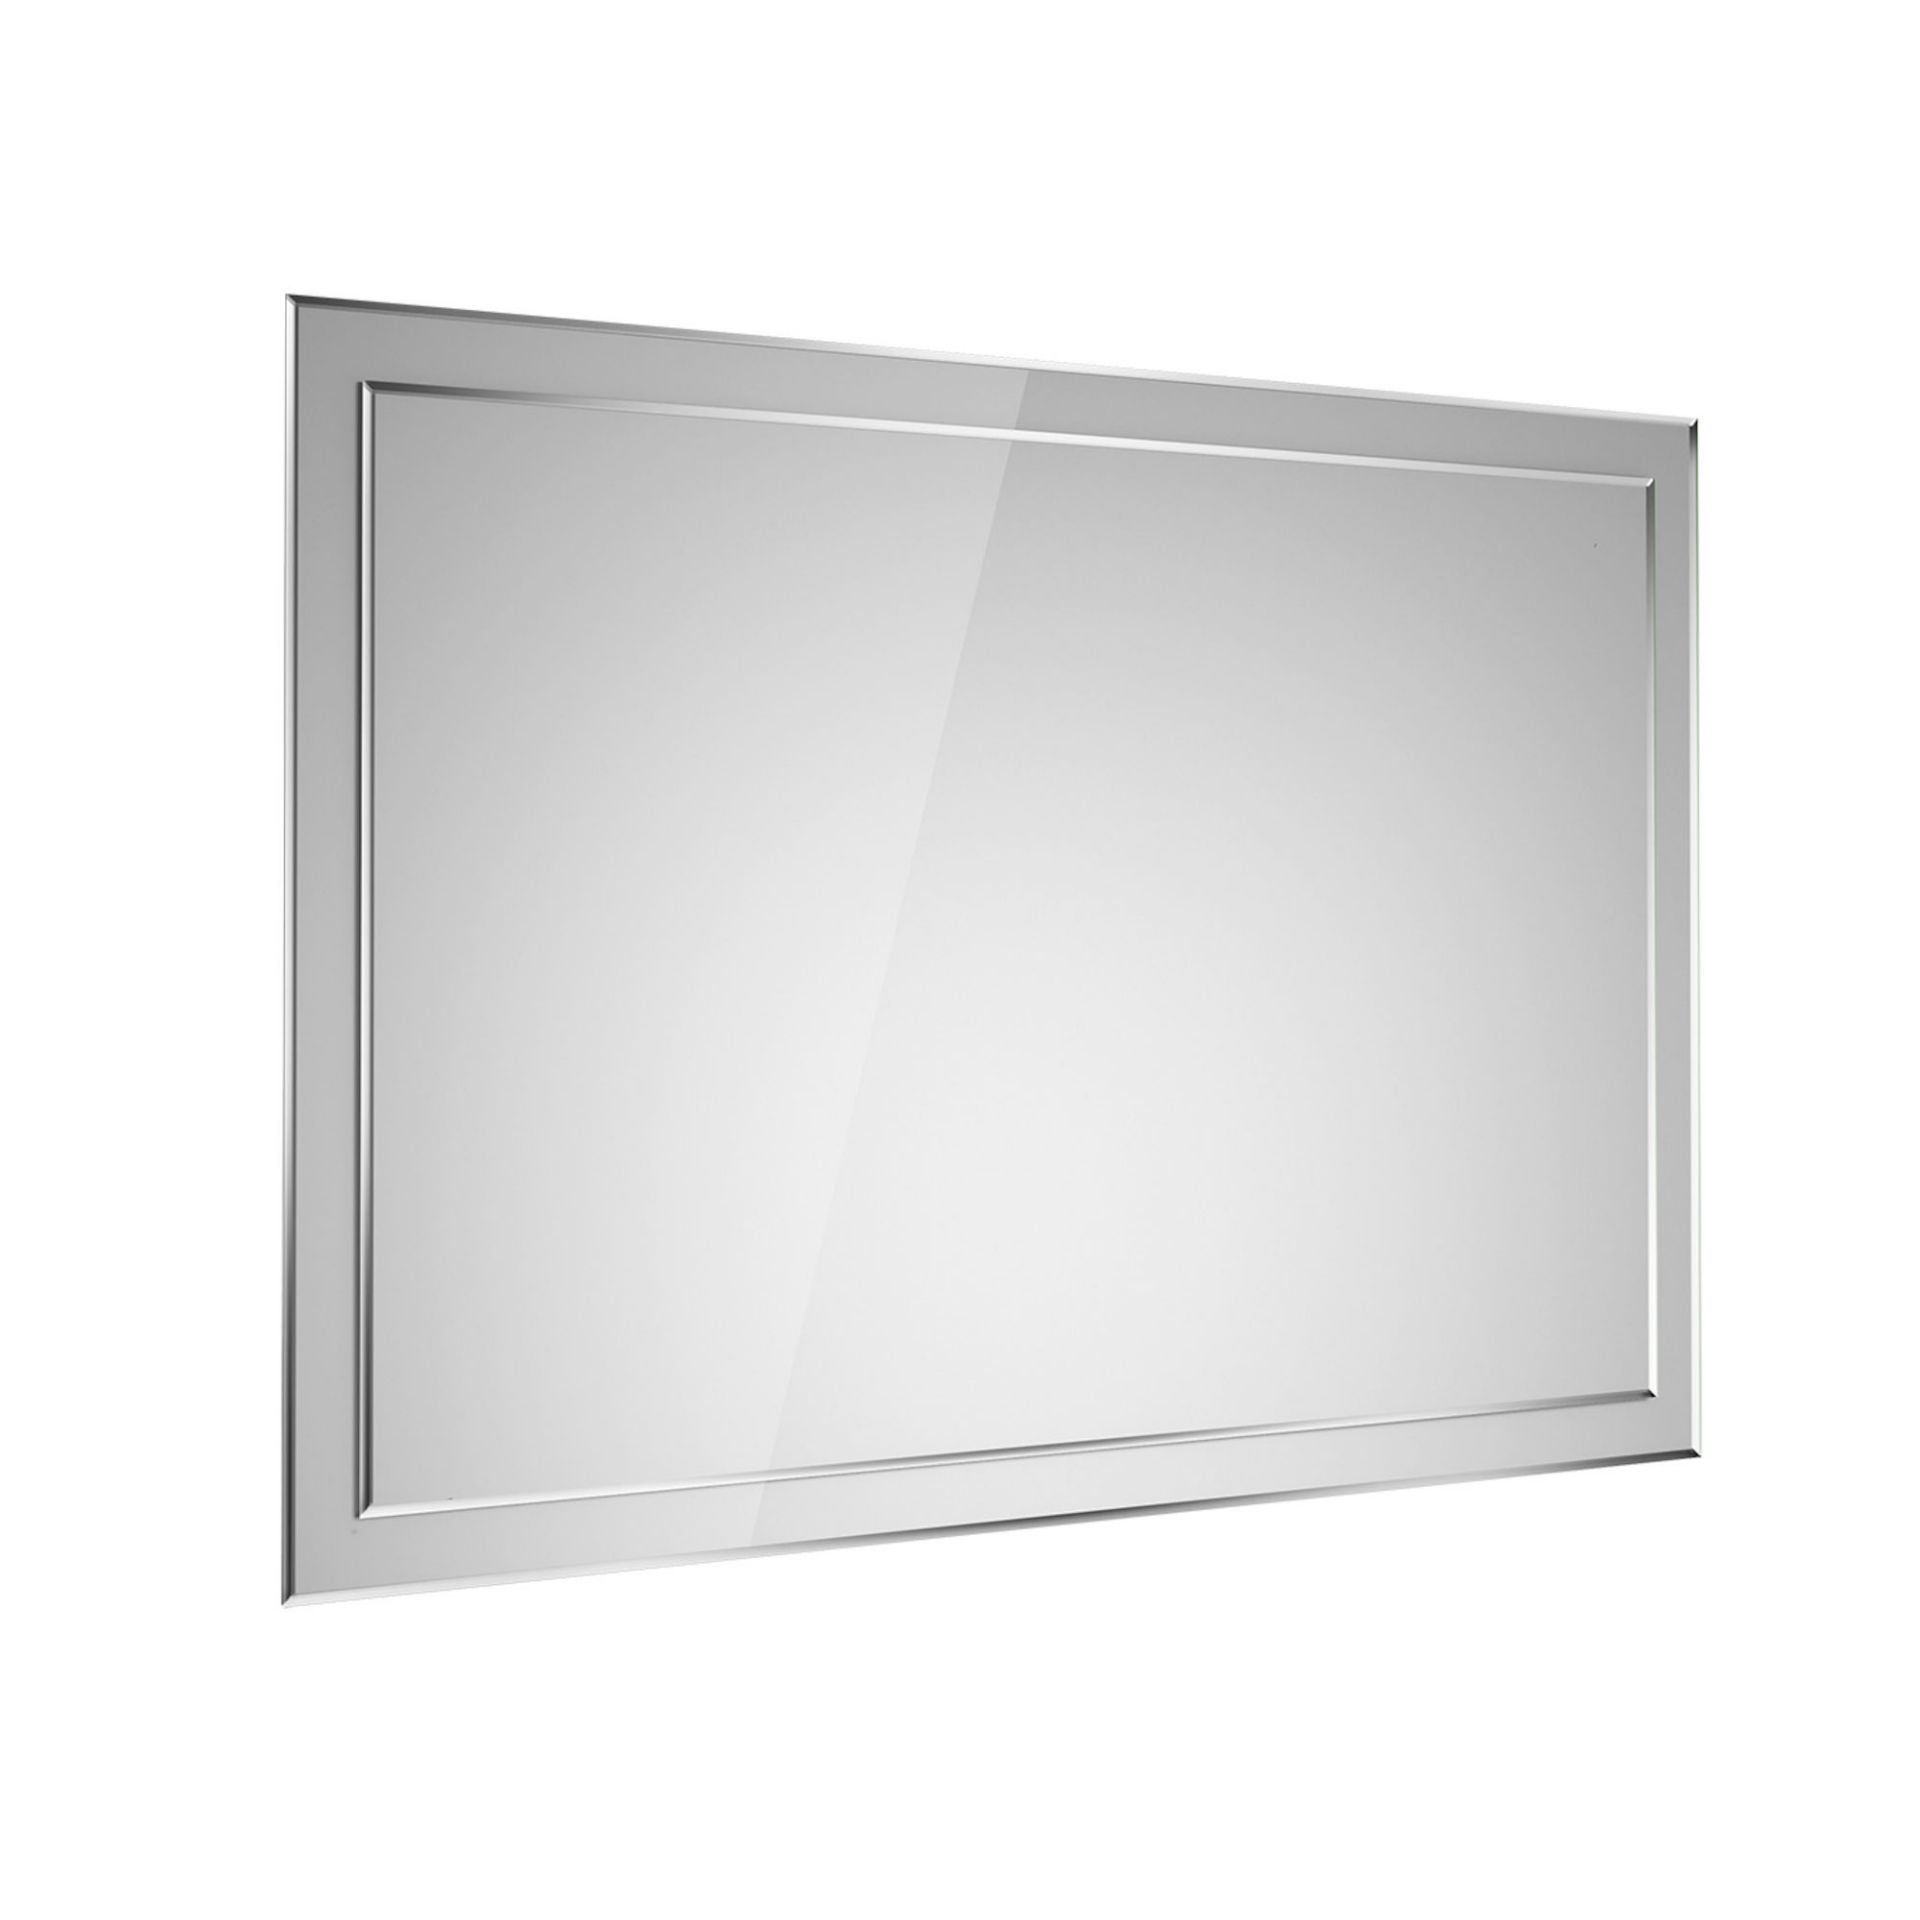 (LP28) 800x1200mm Bevel Mirror. Smooth beveled edge for additional safety and style Supplied fully - Image 5 of 5